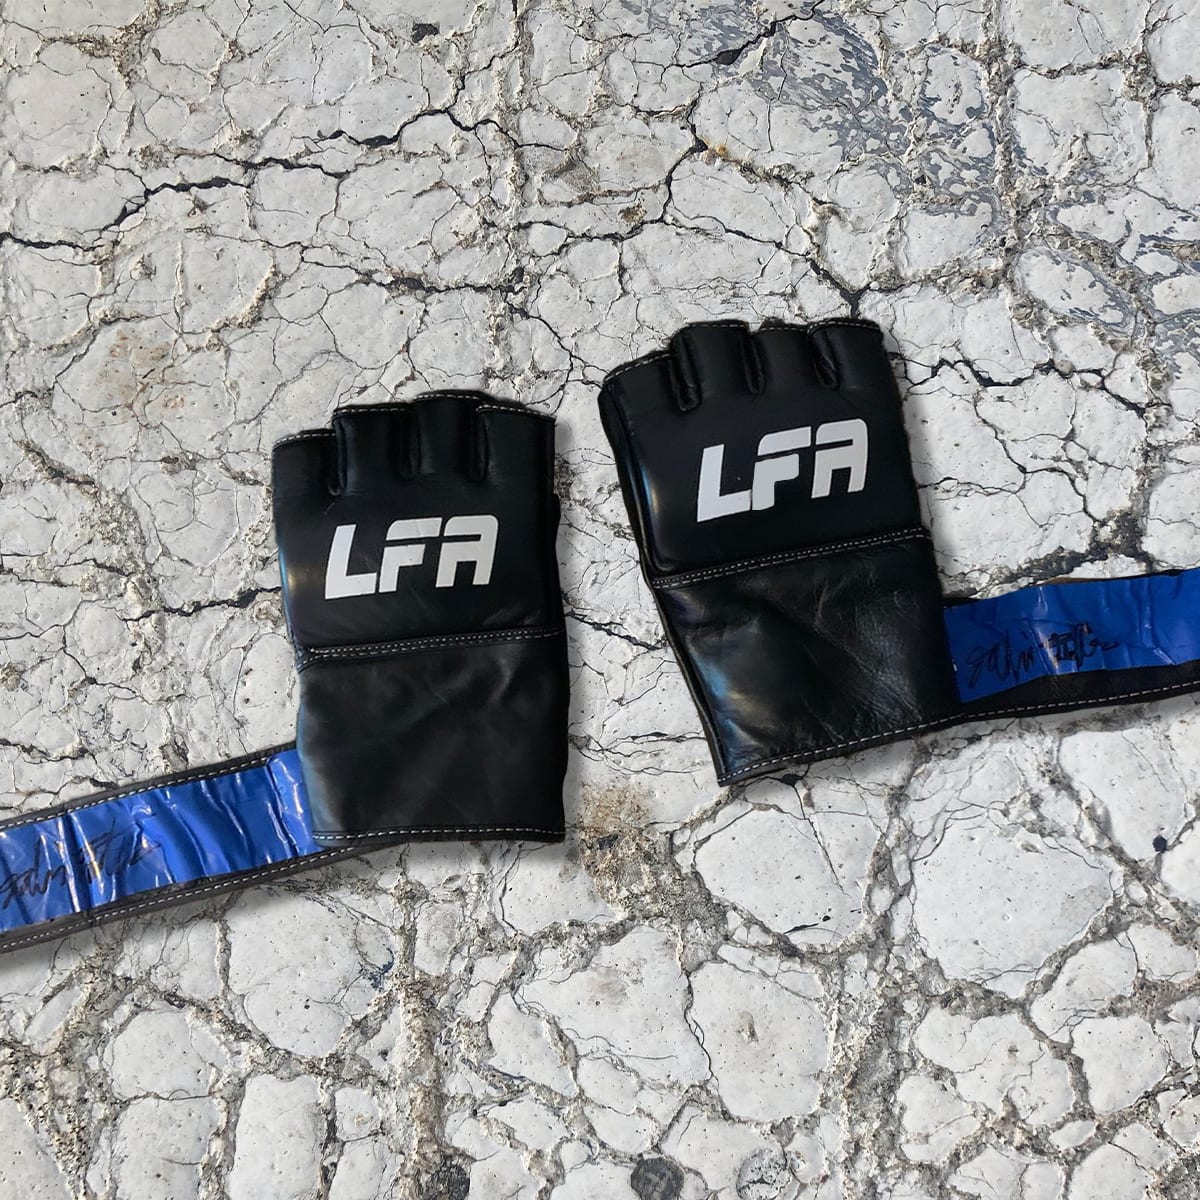 Exclusive LFA Gloves, Fight Worn & Signed by Jalin "The Gentleman" Fuller